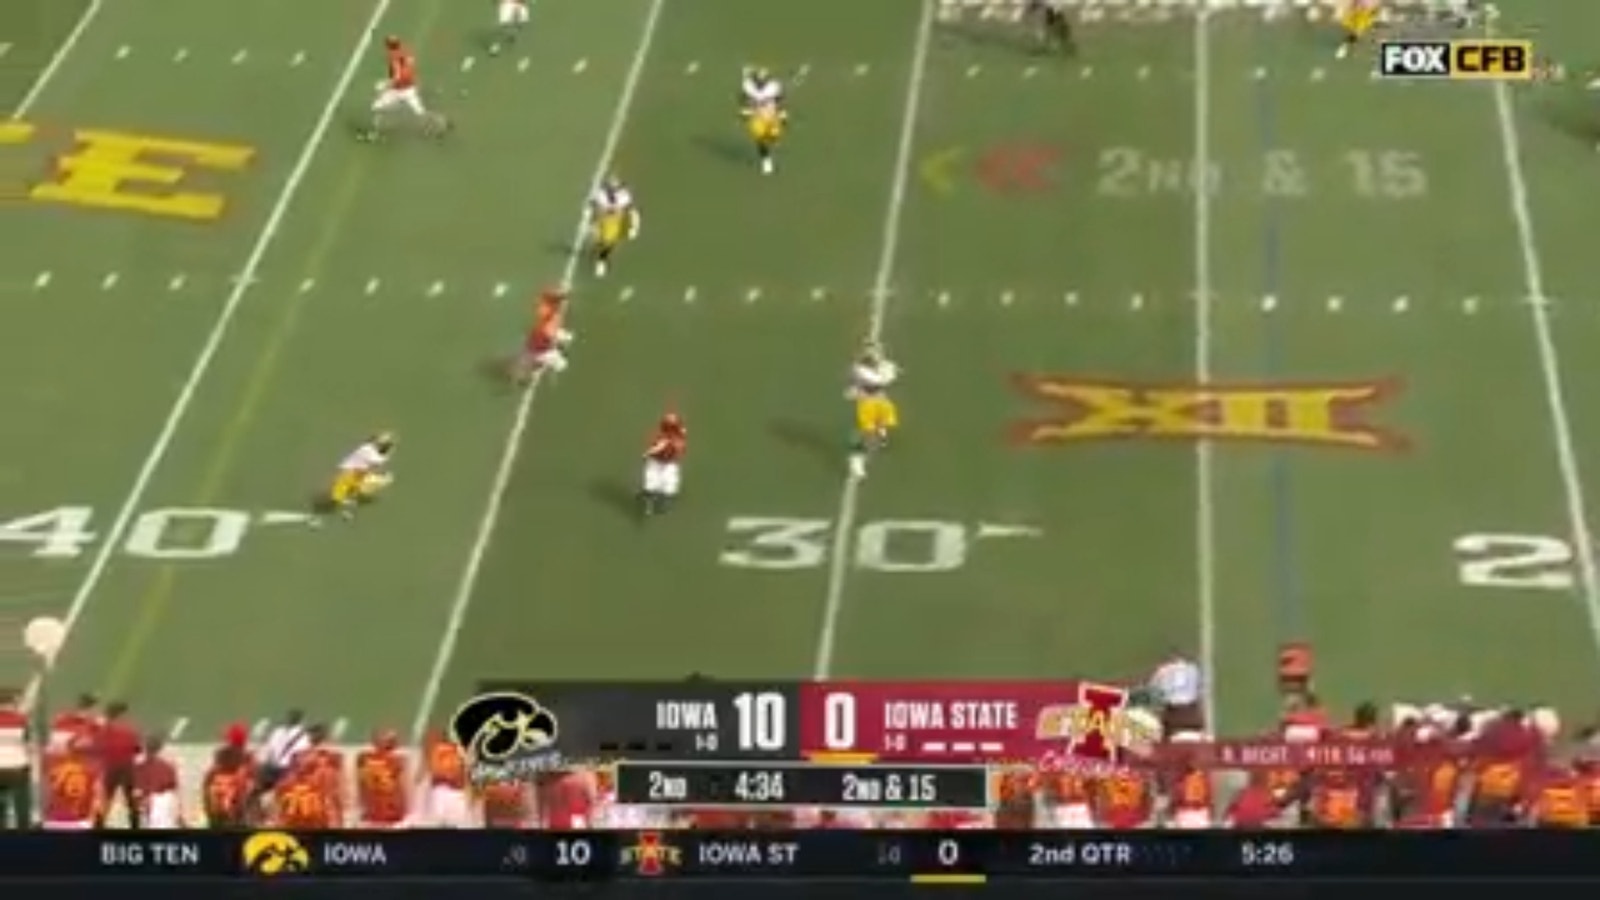 Sebastian Castro intercepts the pass and takes it 30 yards for the pick-six extending Iowa's lead against Iowa State